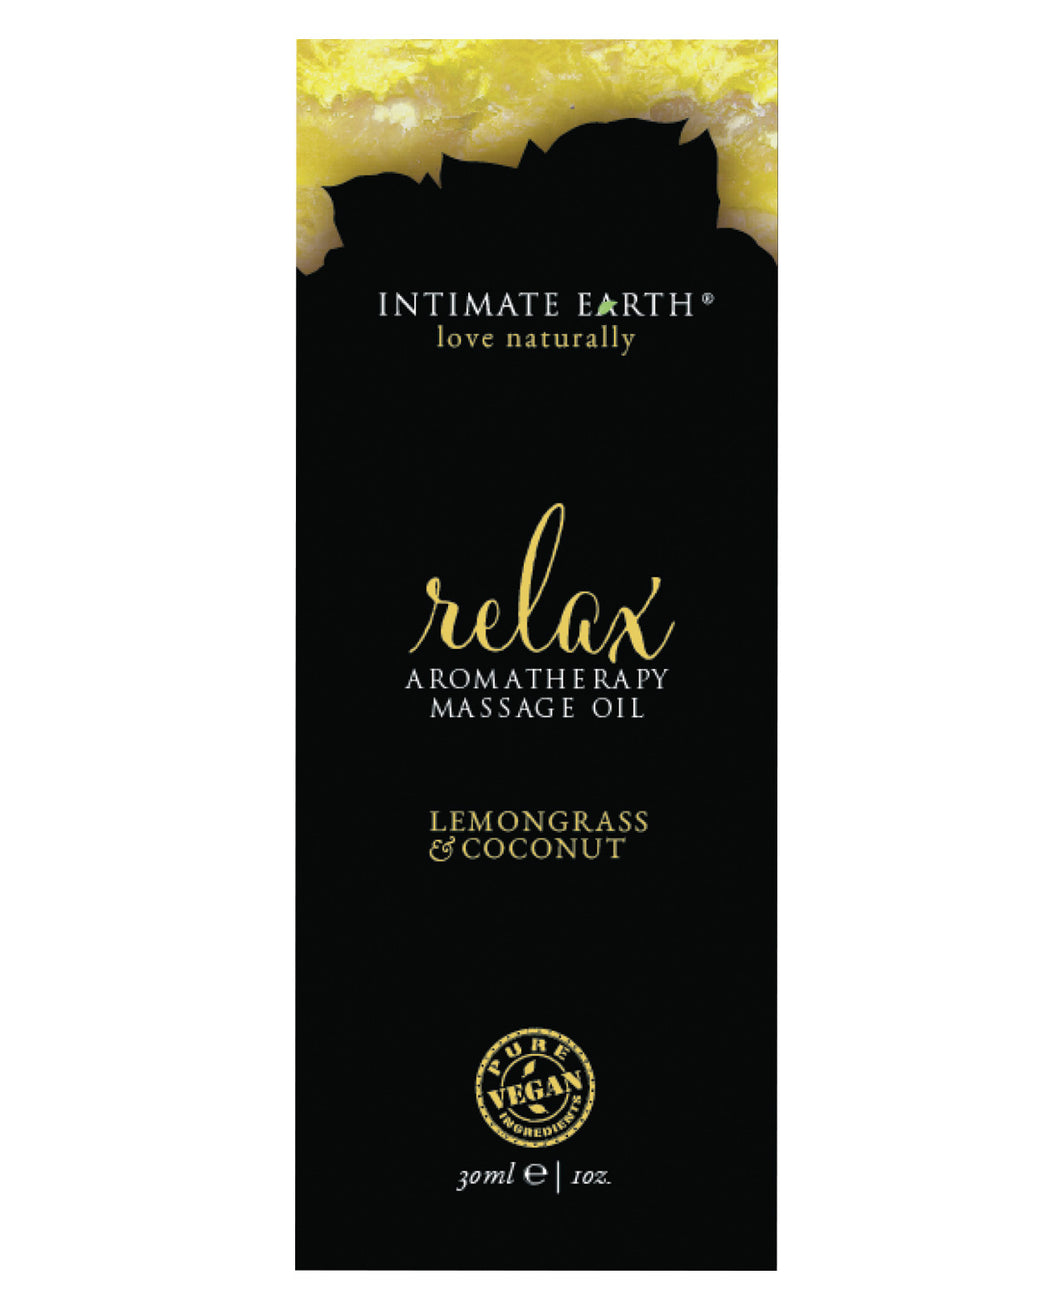 Intimate Earth Relax Massage Oil Foil - 30ml